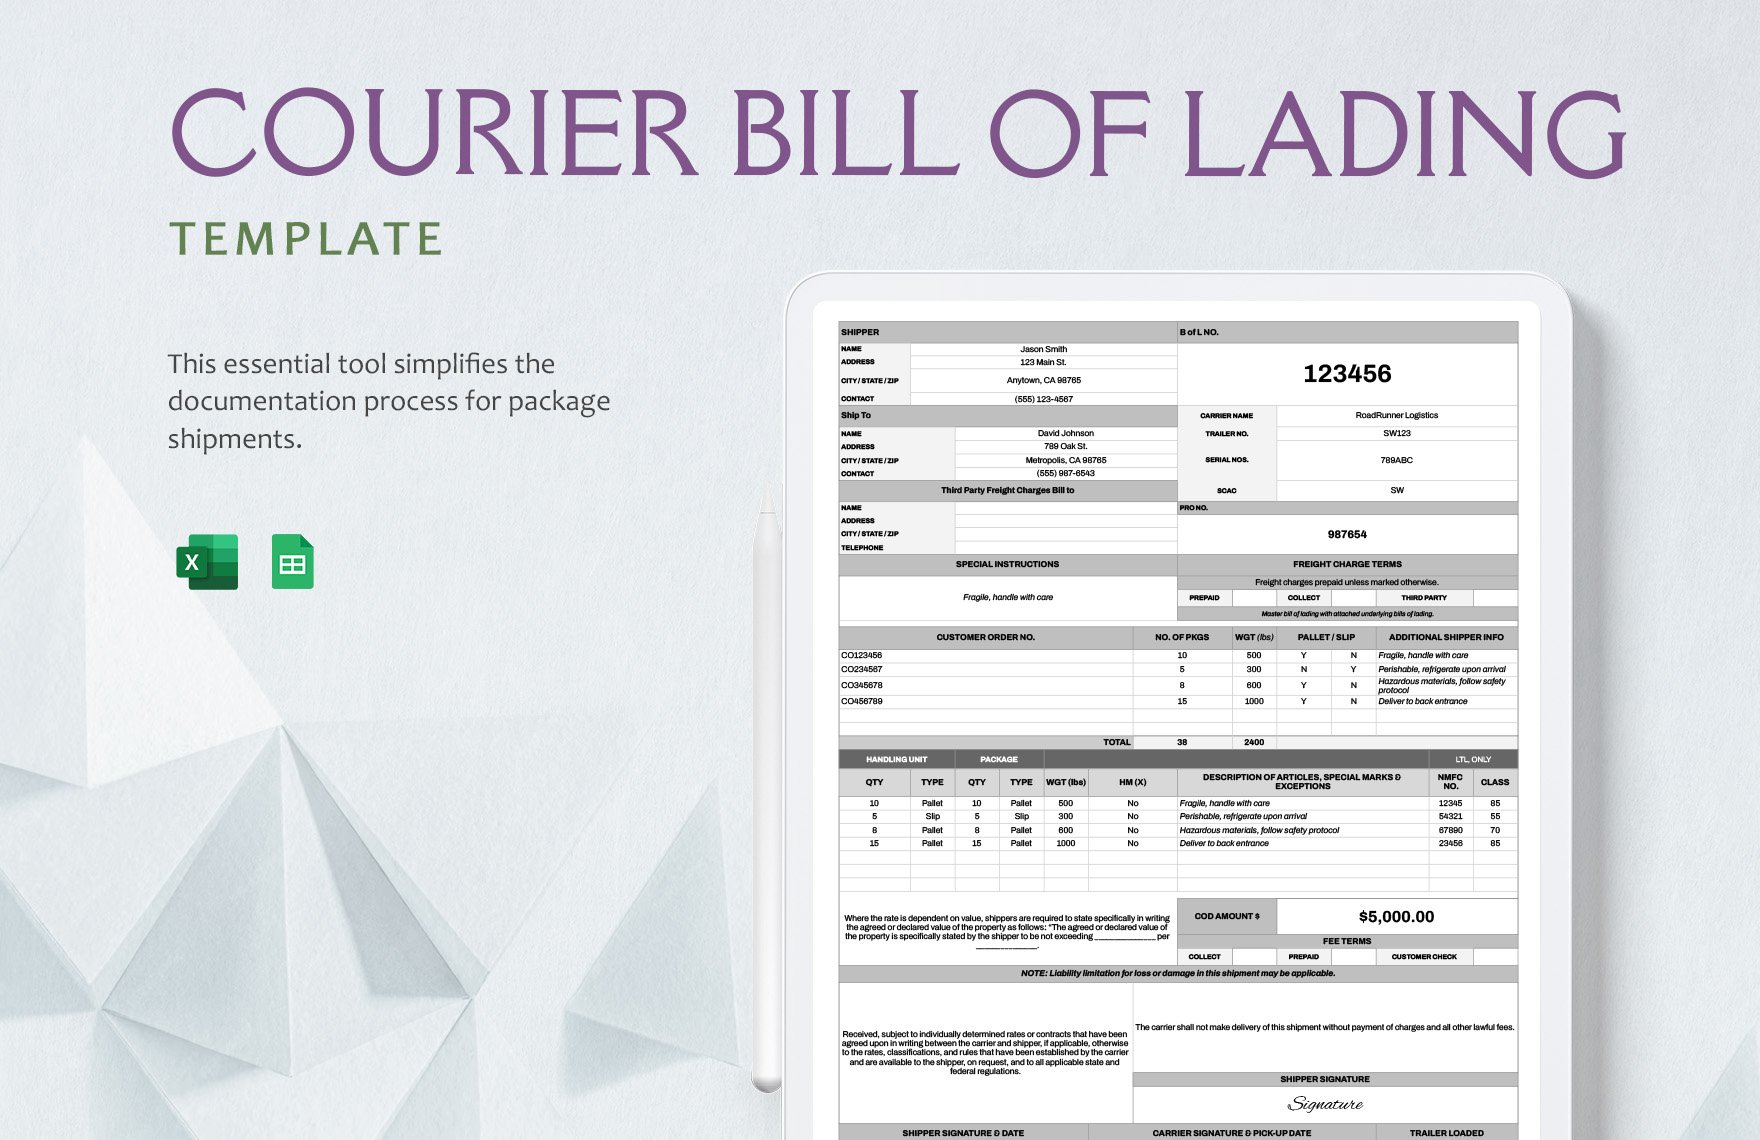 Courier Bill of Lading Template in Excel, Google Sheets